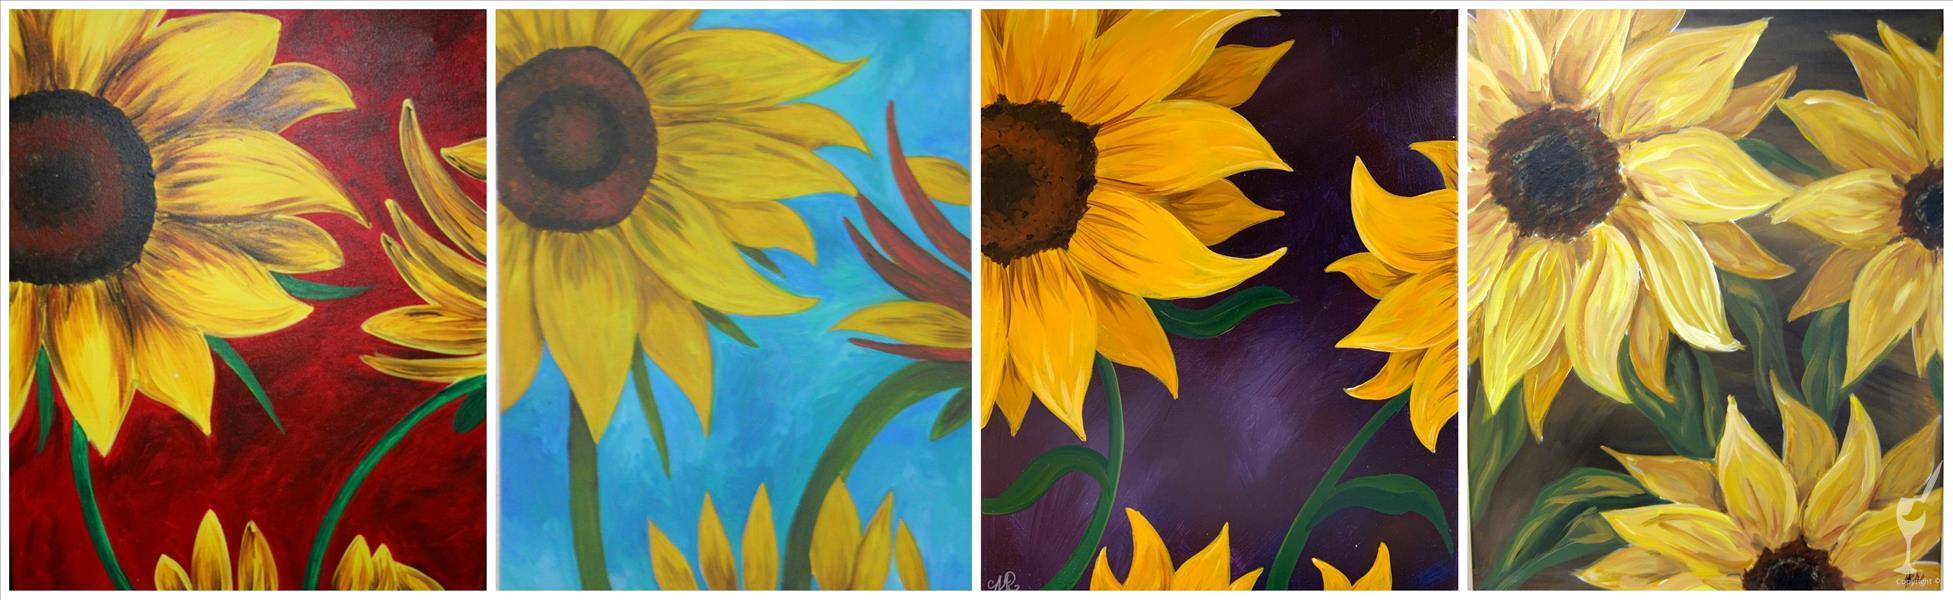 Twisted Tuesday! Pick Your Sunflowers - 2x Points!